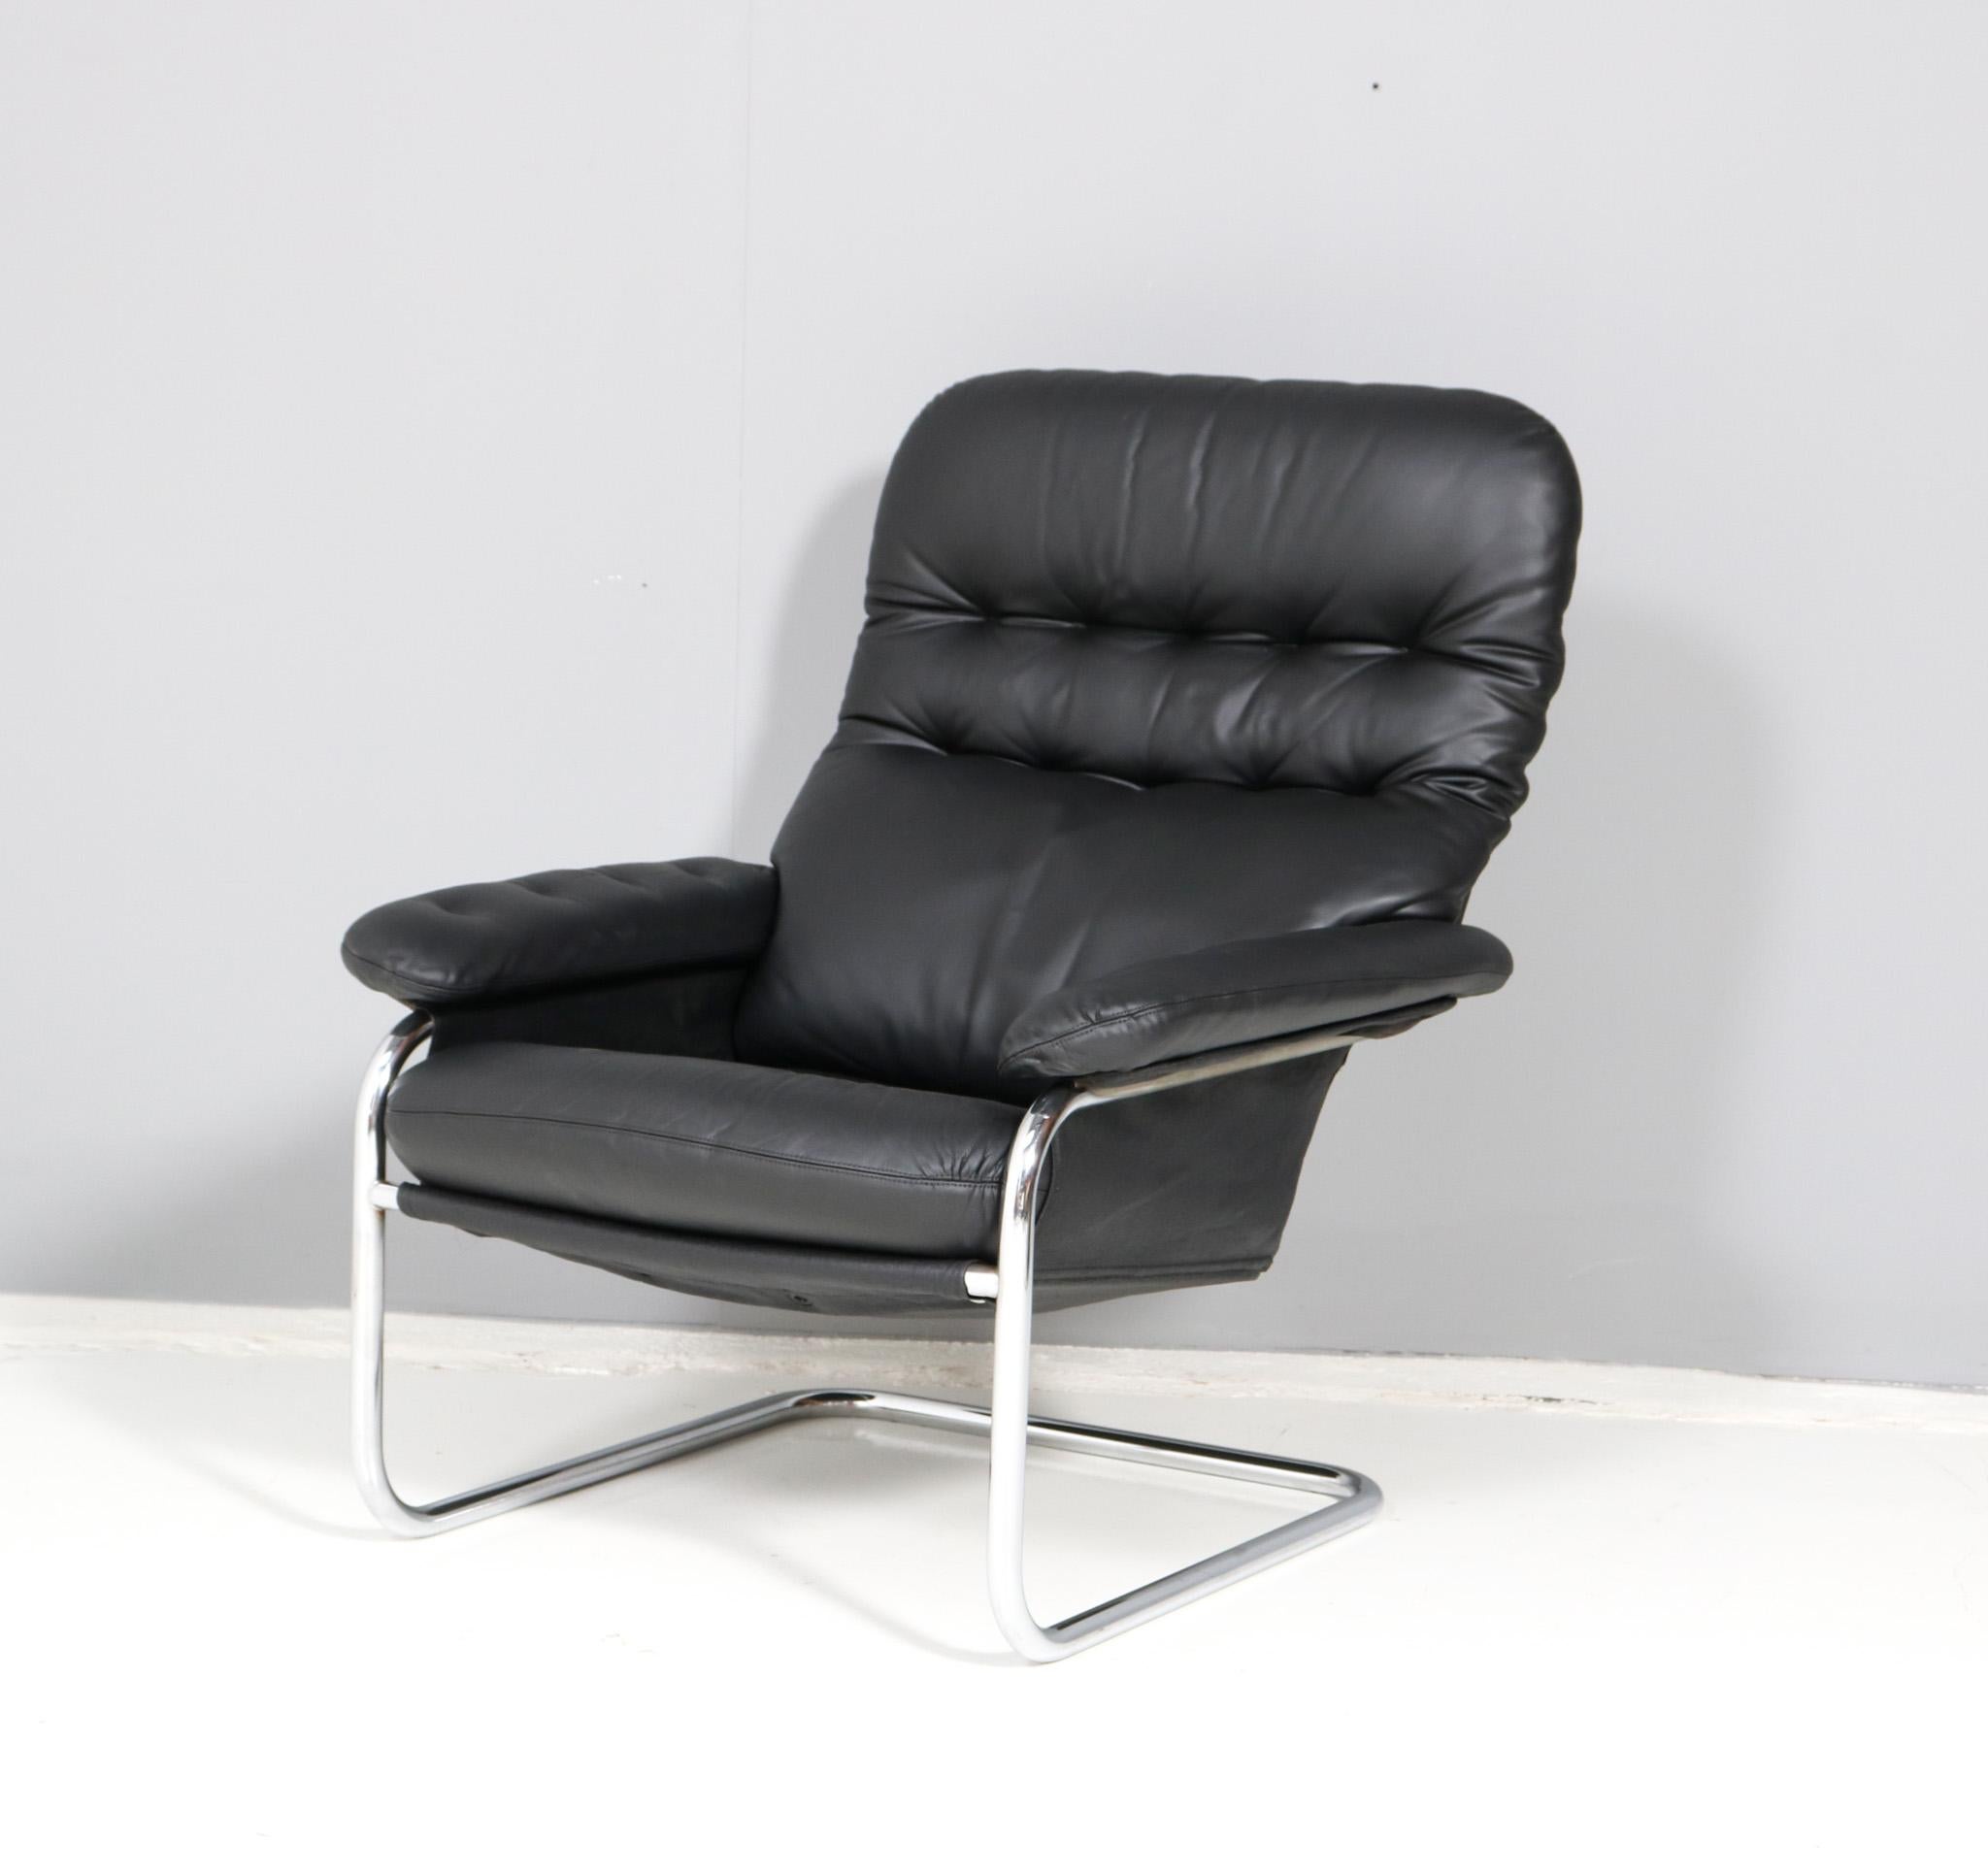 Stunning and rare Mid-Century Modern cantilever lounge chair.
Design by Sam Larsson for Dux of Sweden.
Striking Swedish design from the 1970s.
Chrome tubular steel base with original refinished black leather cushions.
This wonderful Mid-Century